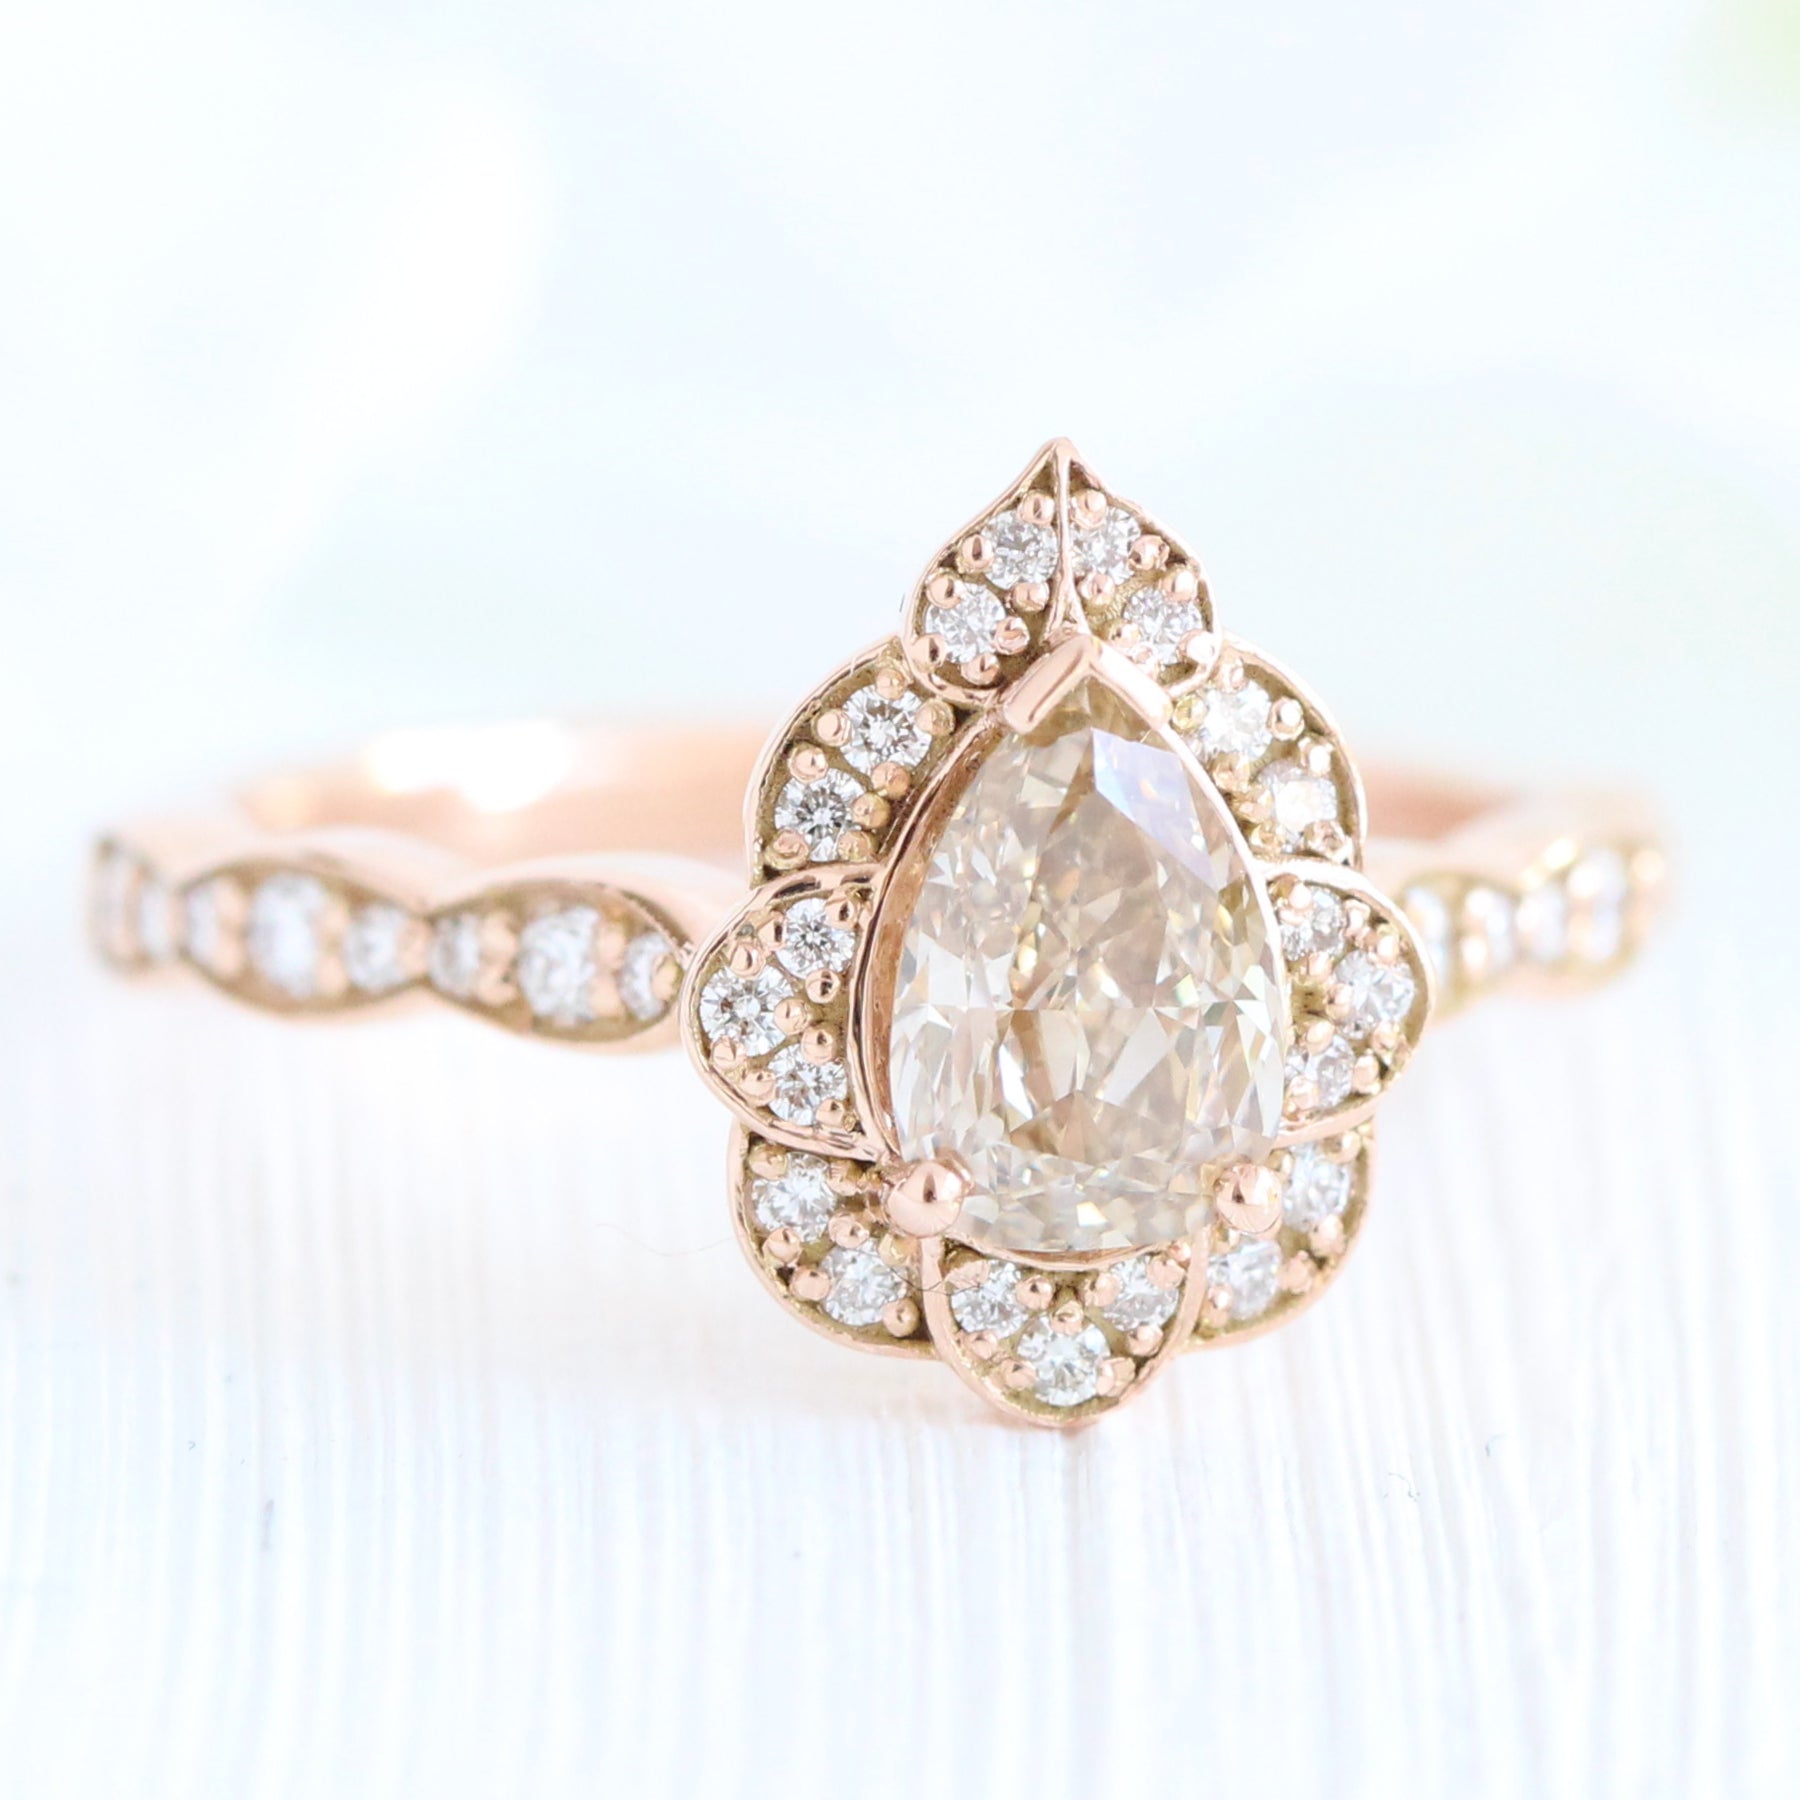 Champagne Diamond Engagement Ring in Rose Gold Vintage Floral Pear Ring by La More Design Jewelry